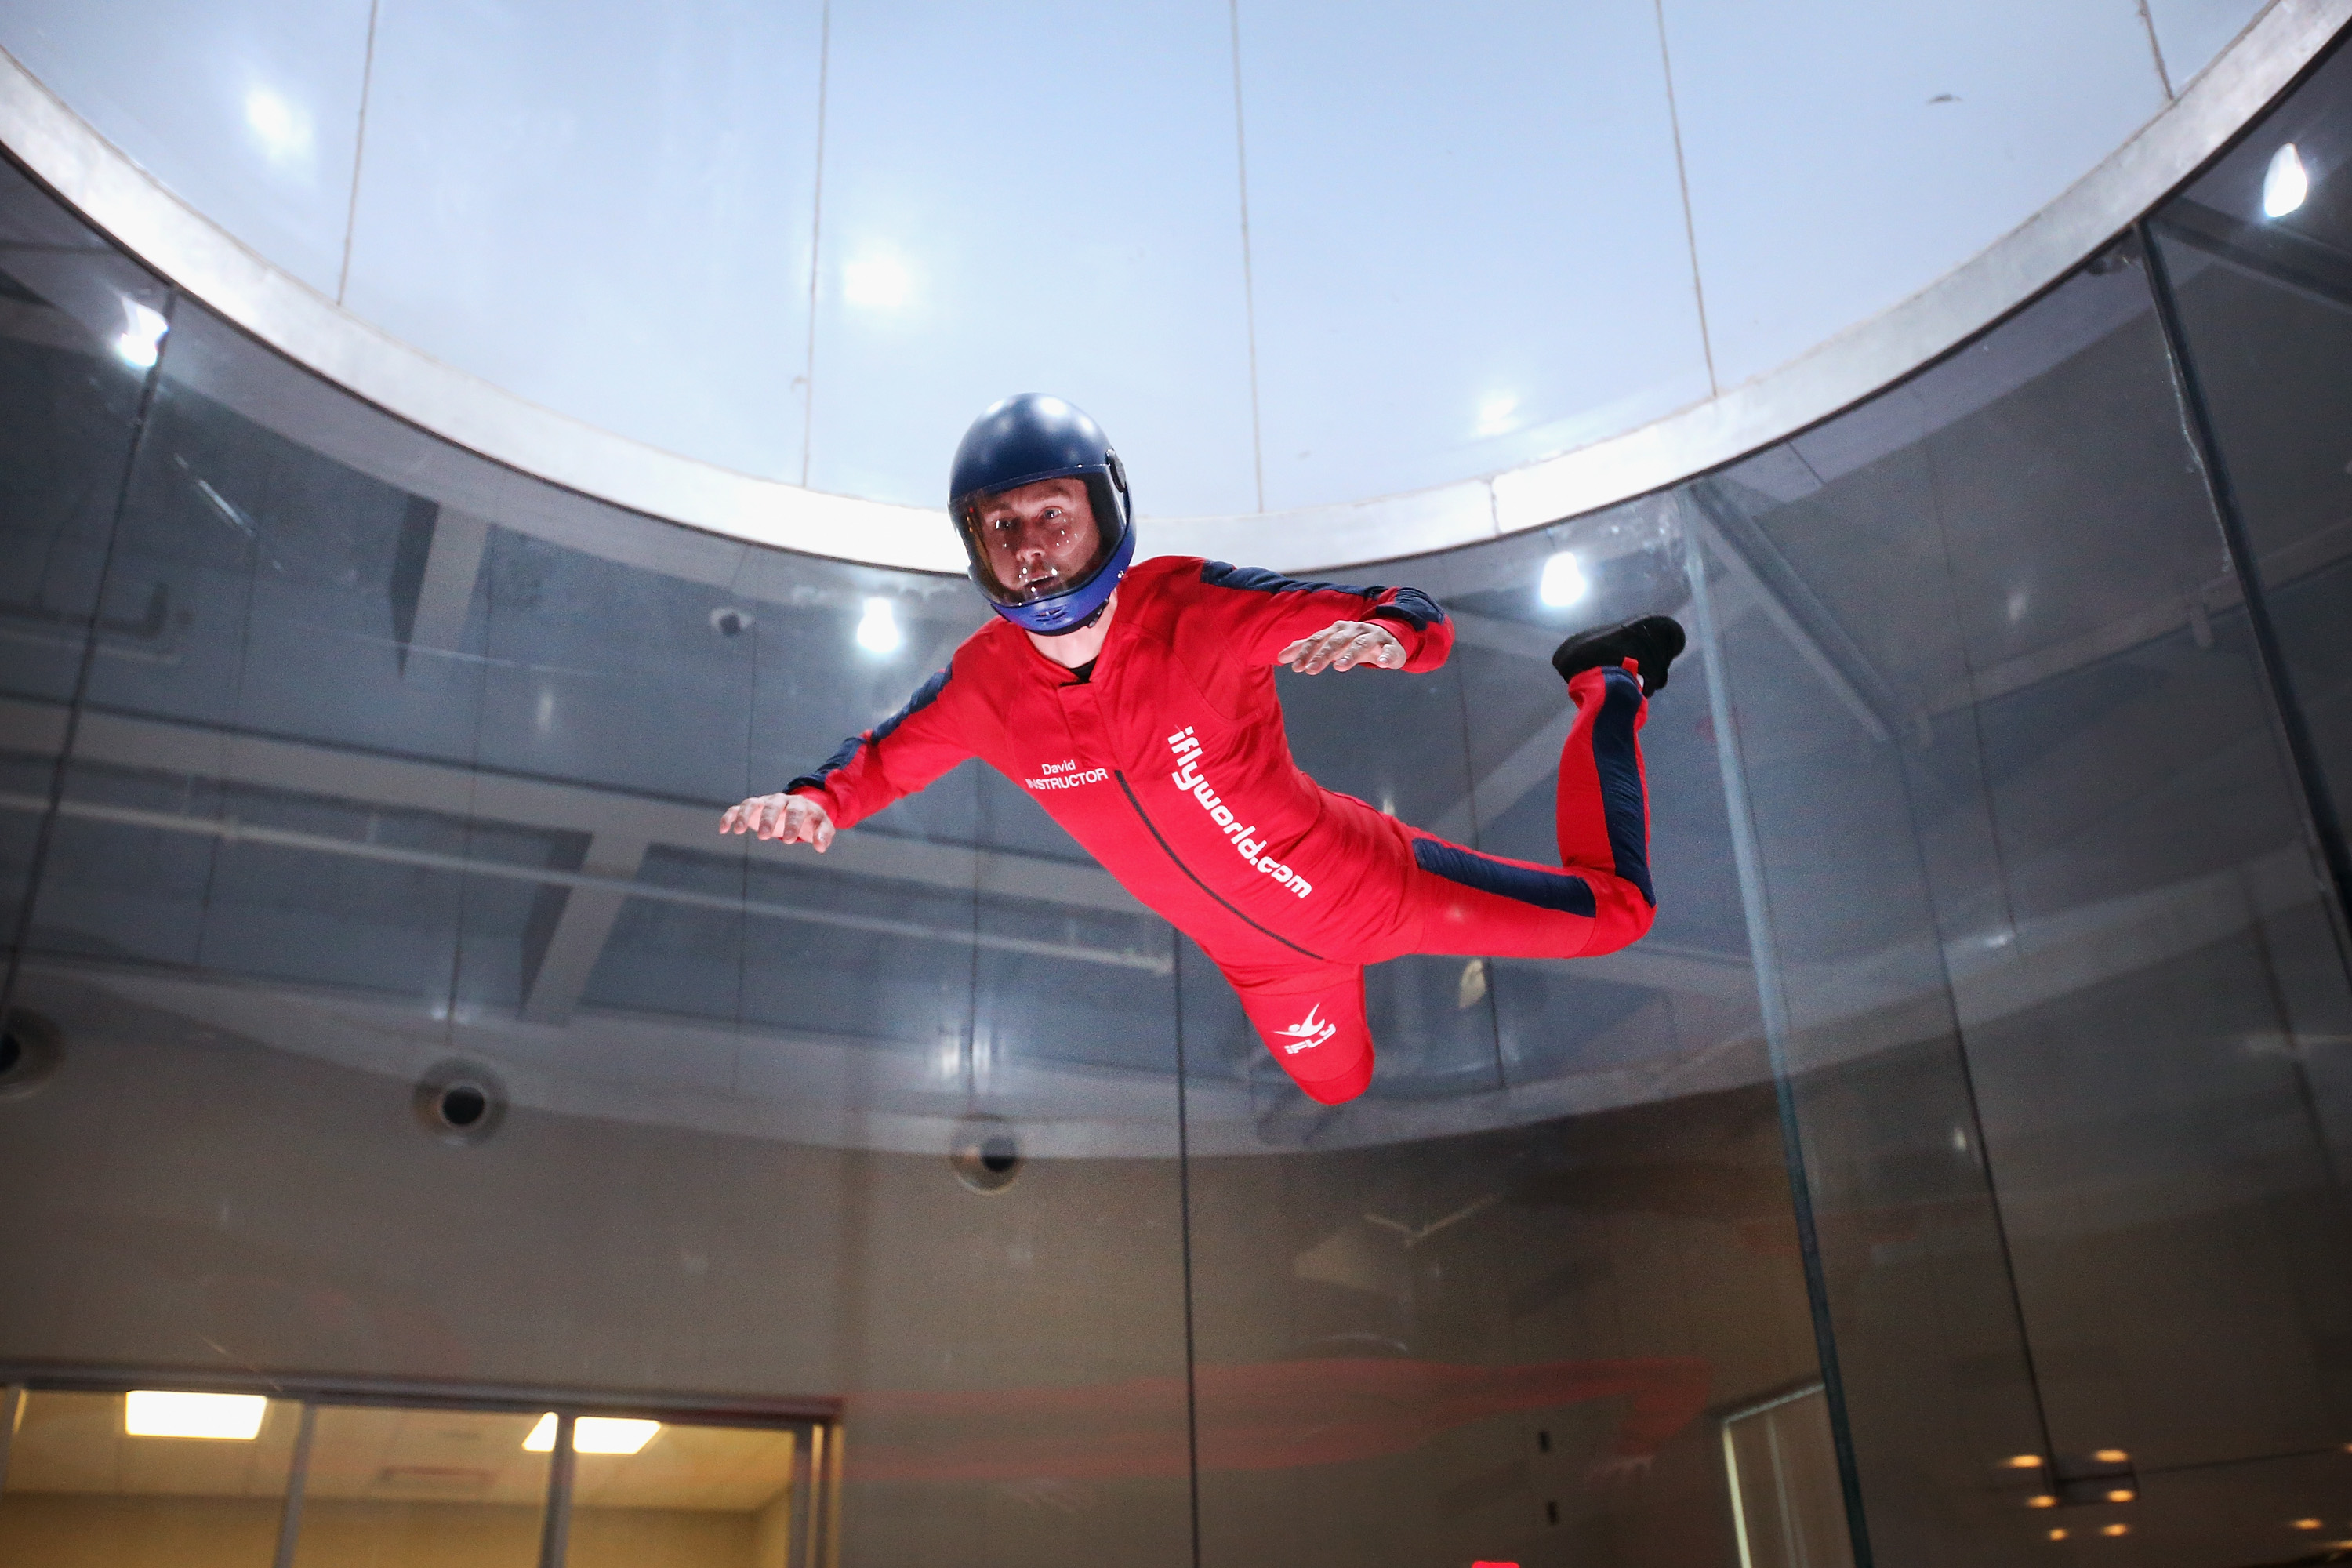 Rosemont, Illinois Skydiving indoors Pictures CBS News